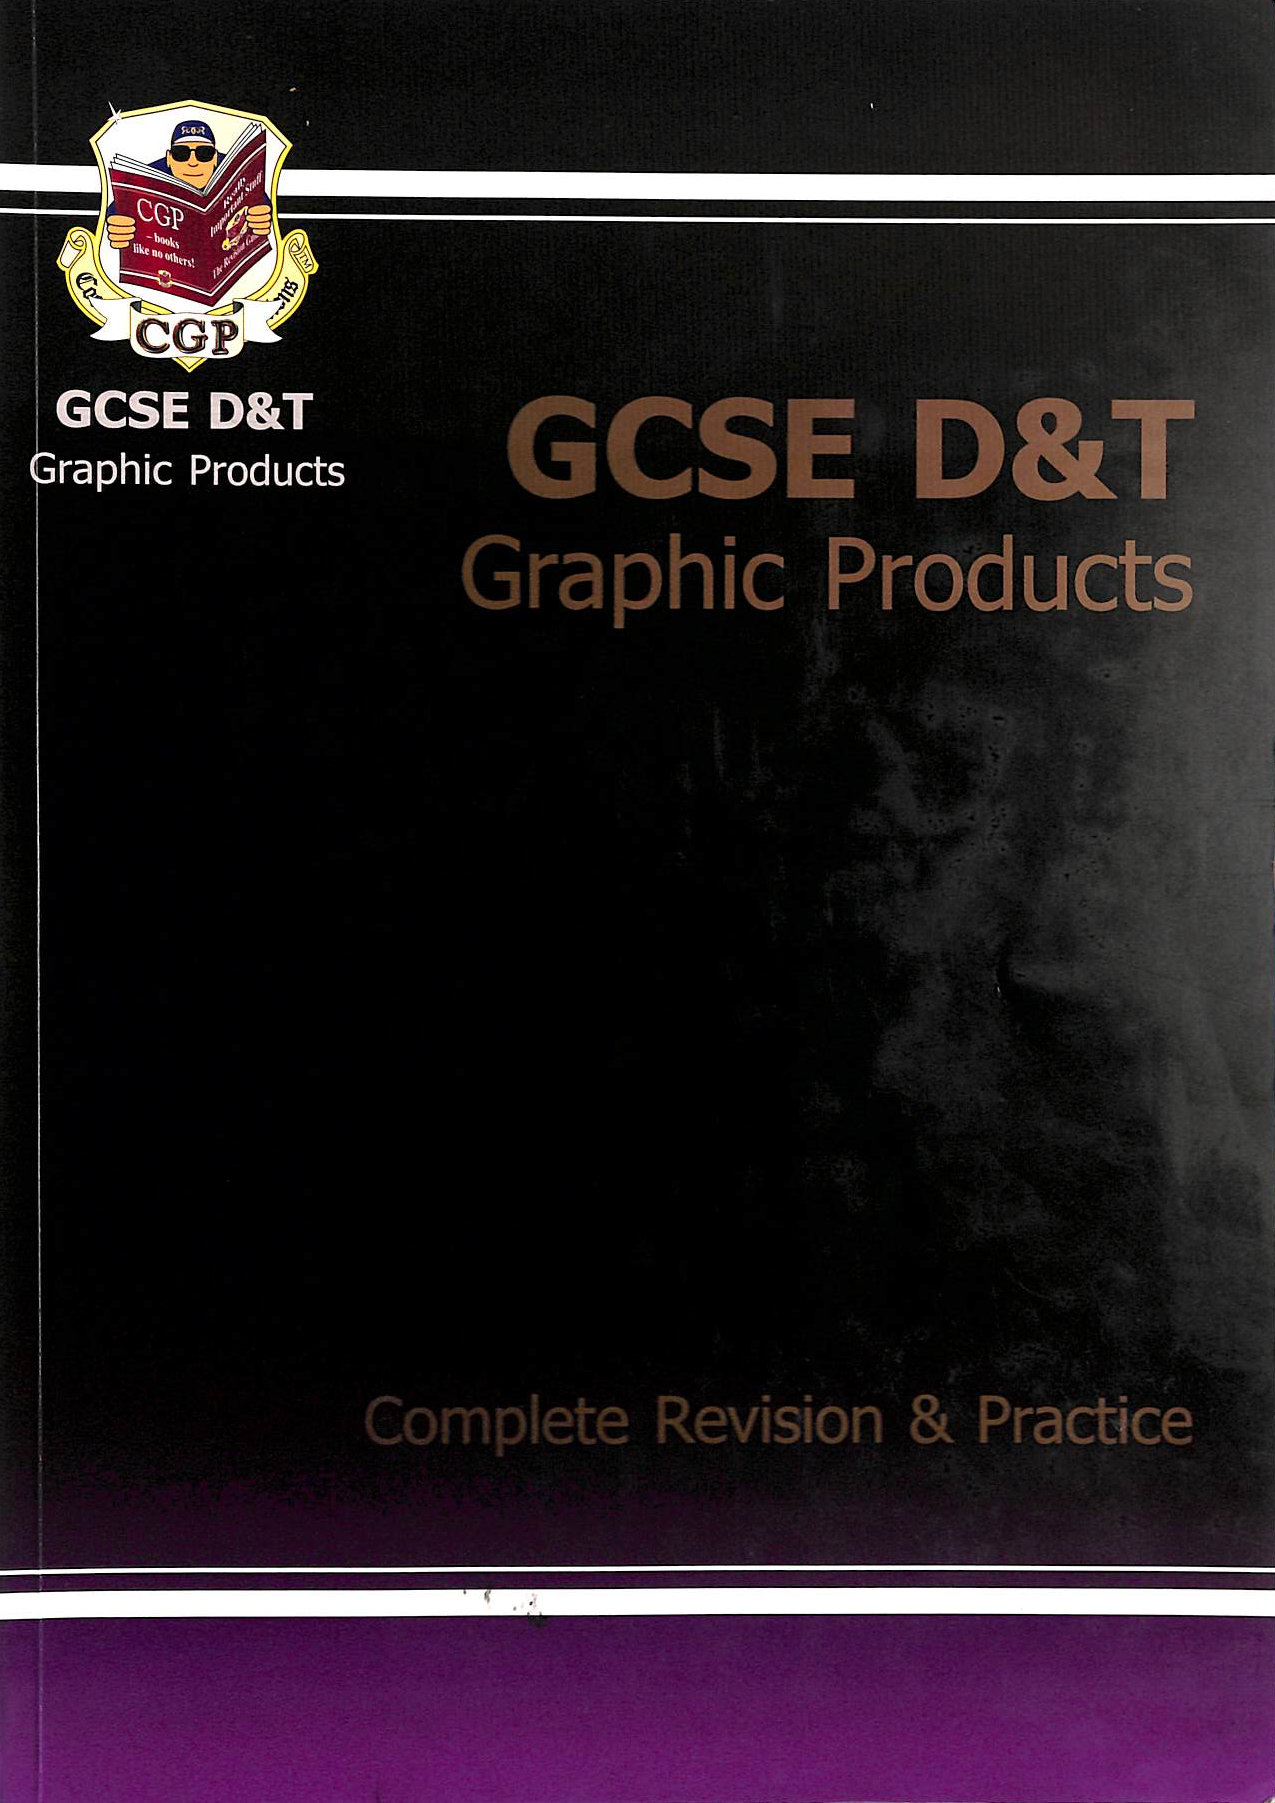 CGP BOOKS - GCSE Design & Technology Graphic Products Complete Revision & Practice